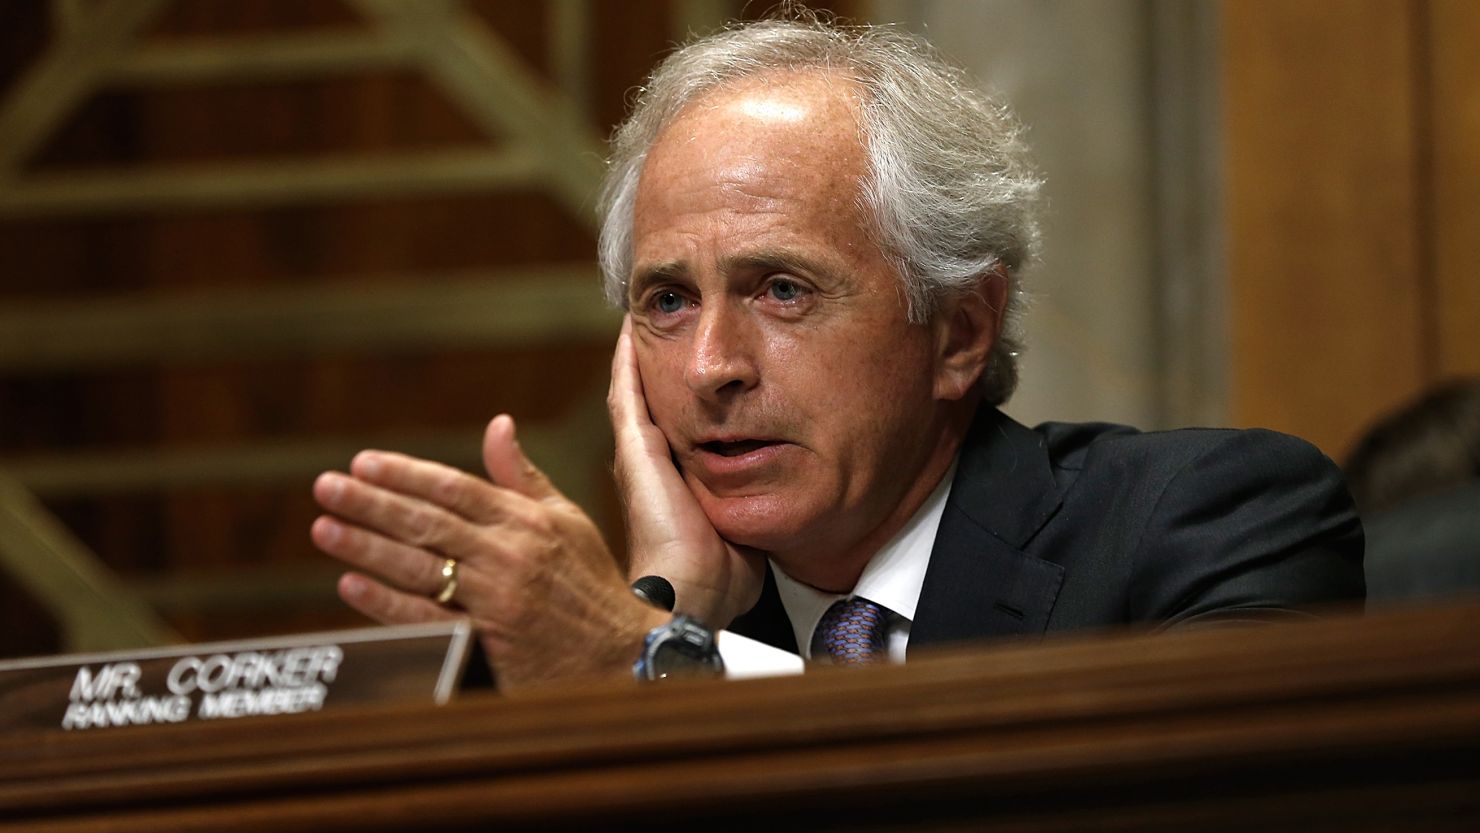 Senate Foreign Relations Committee ranking member Sen. Bob Corker (R-TN) speaks during a hearing July 9, 2014 in Washington, DC.